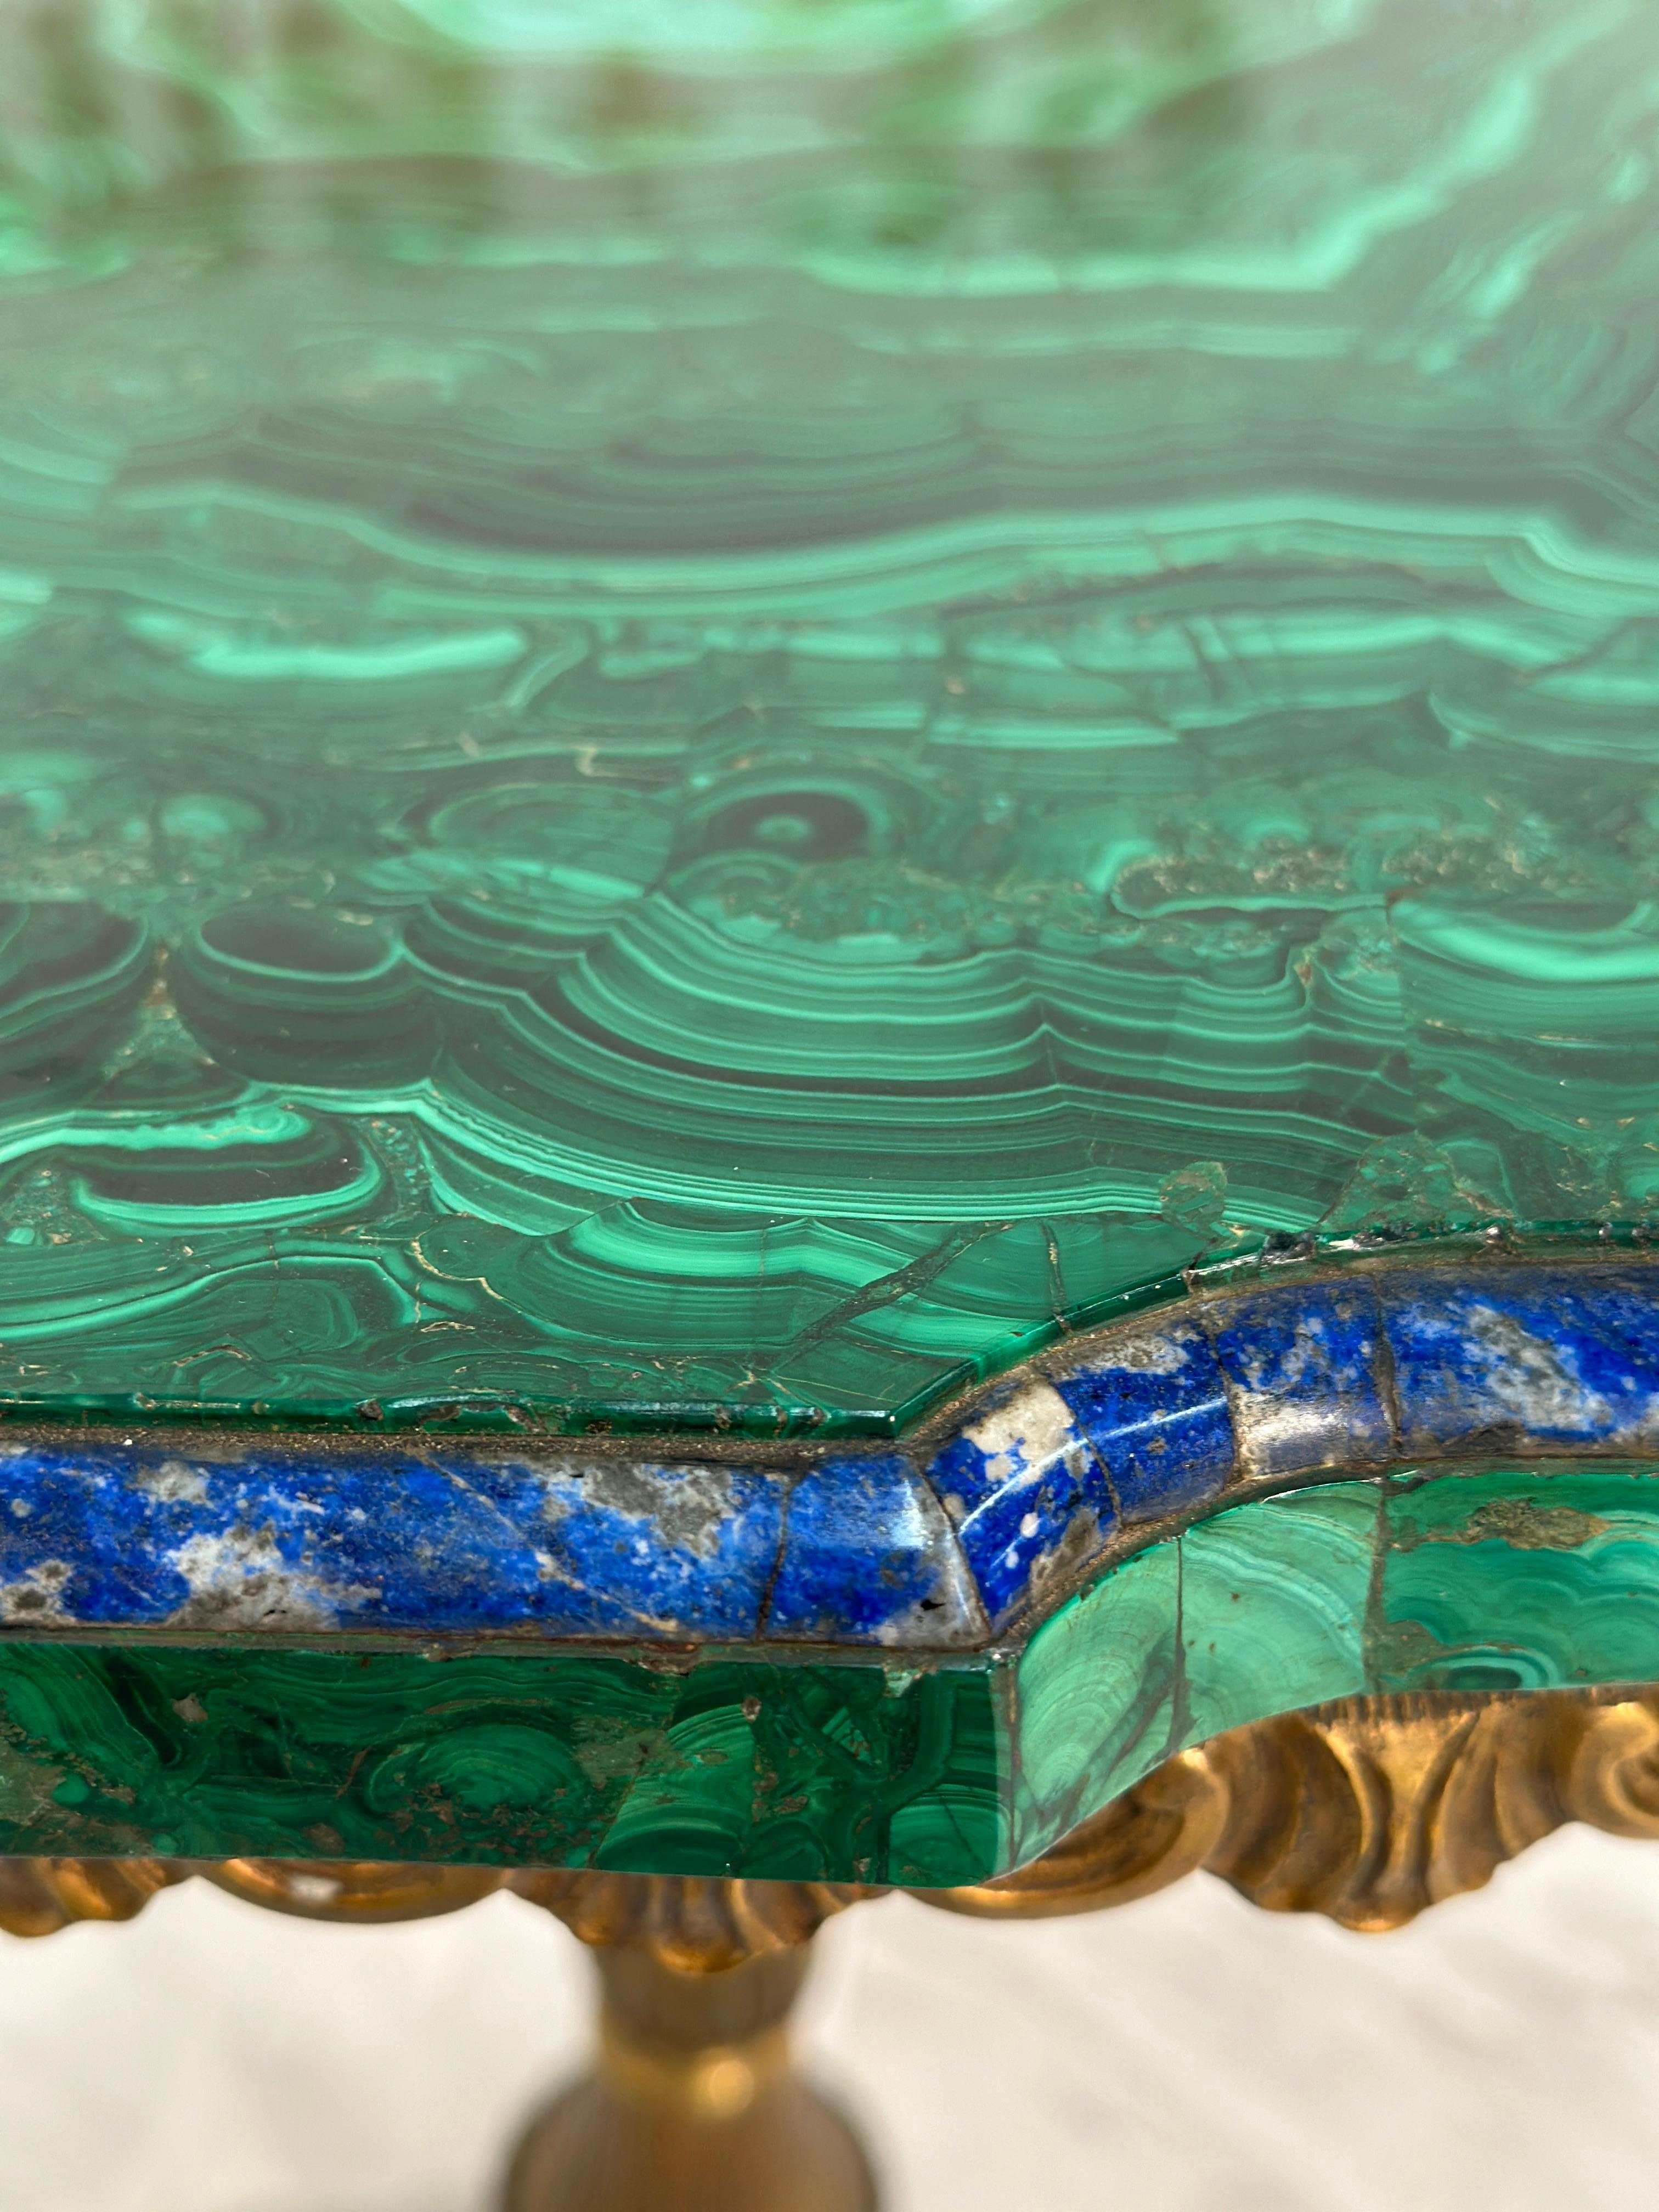 The Vintage Italian Brass and Malachite Stone Side Table from the 1940s exudes opulence and sophistication. Crafted with exquisite Italian craftsmanship, the table features a lustrous brass base complemented by the rich green hues of malachite